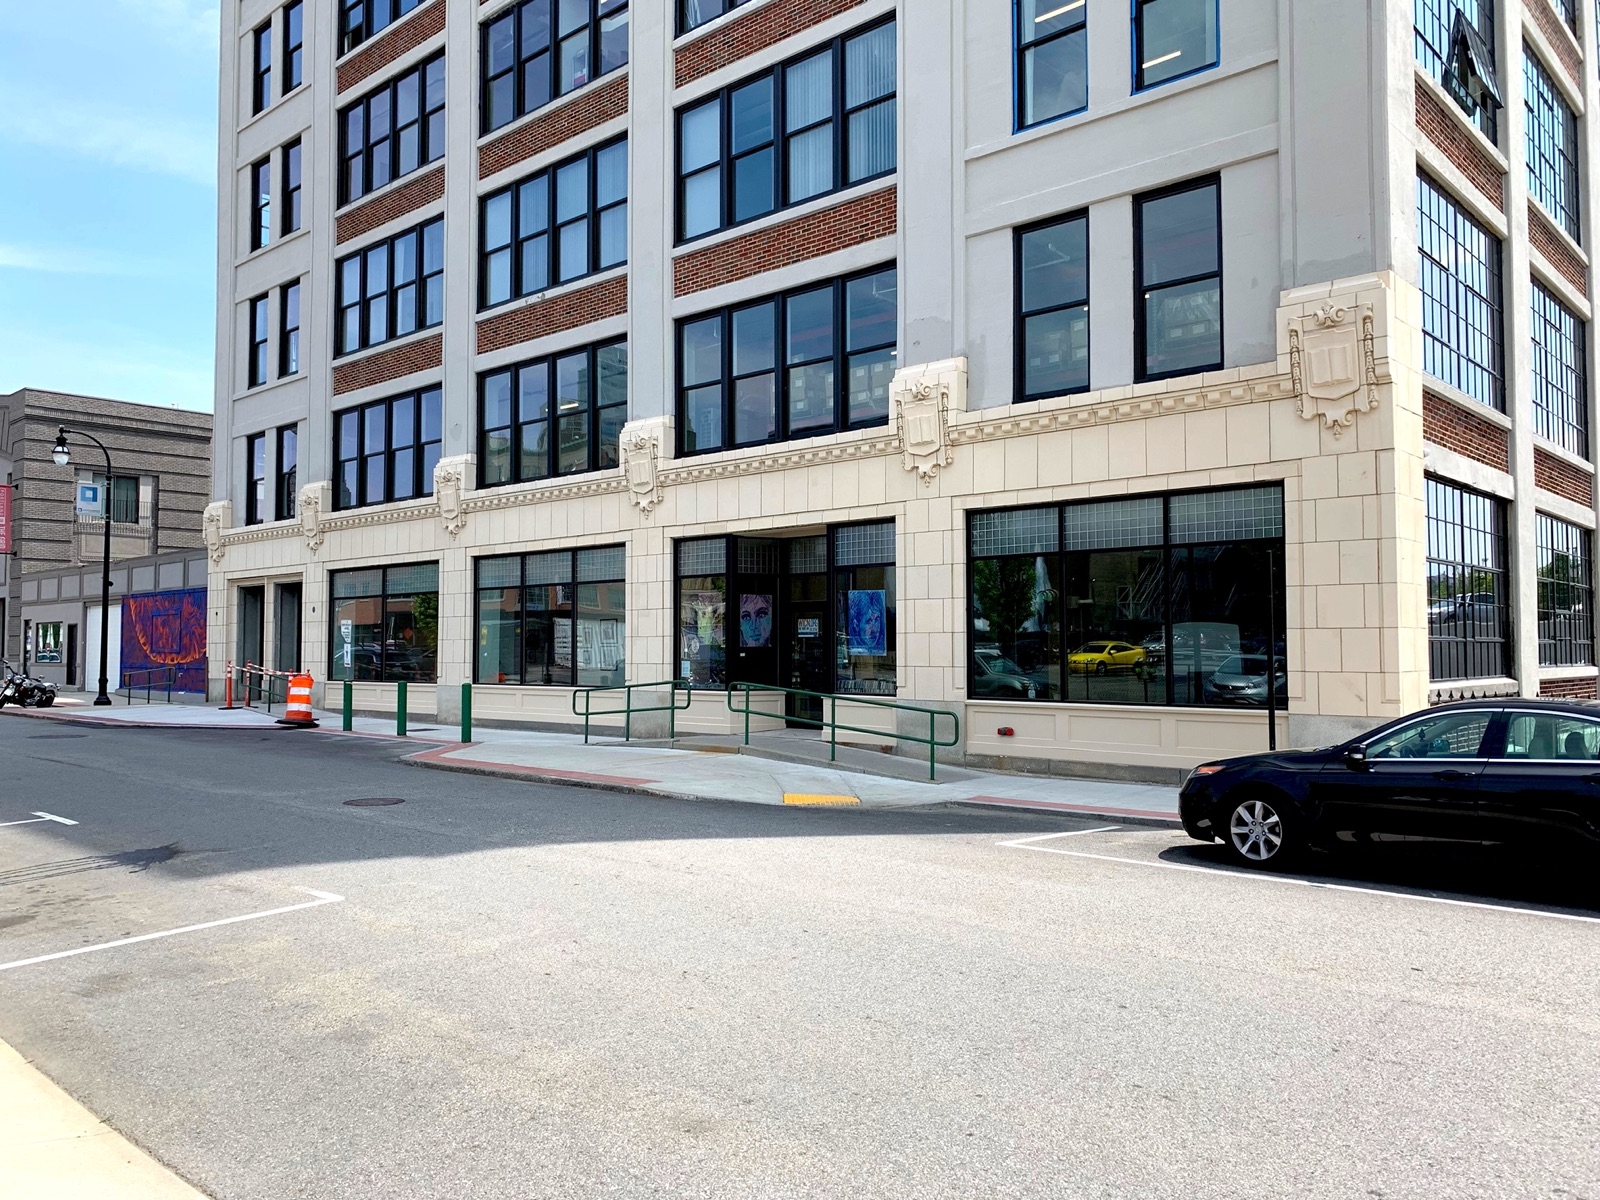 Commercial Architects - Worcester, Massachusetts - Printers Storefront 2